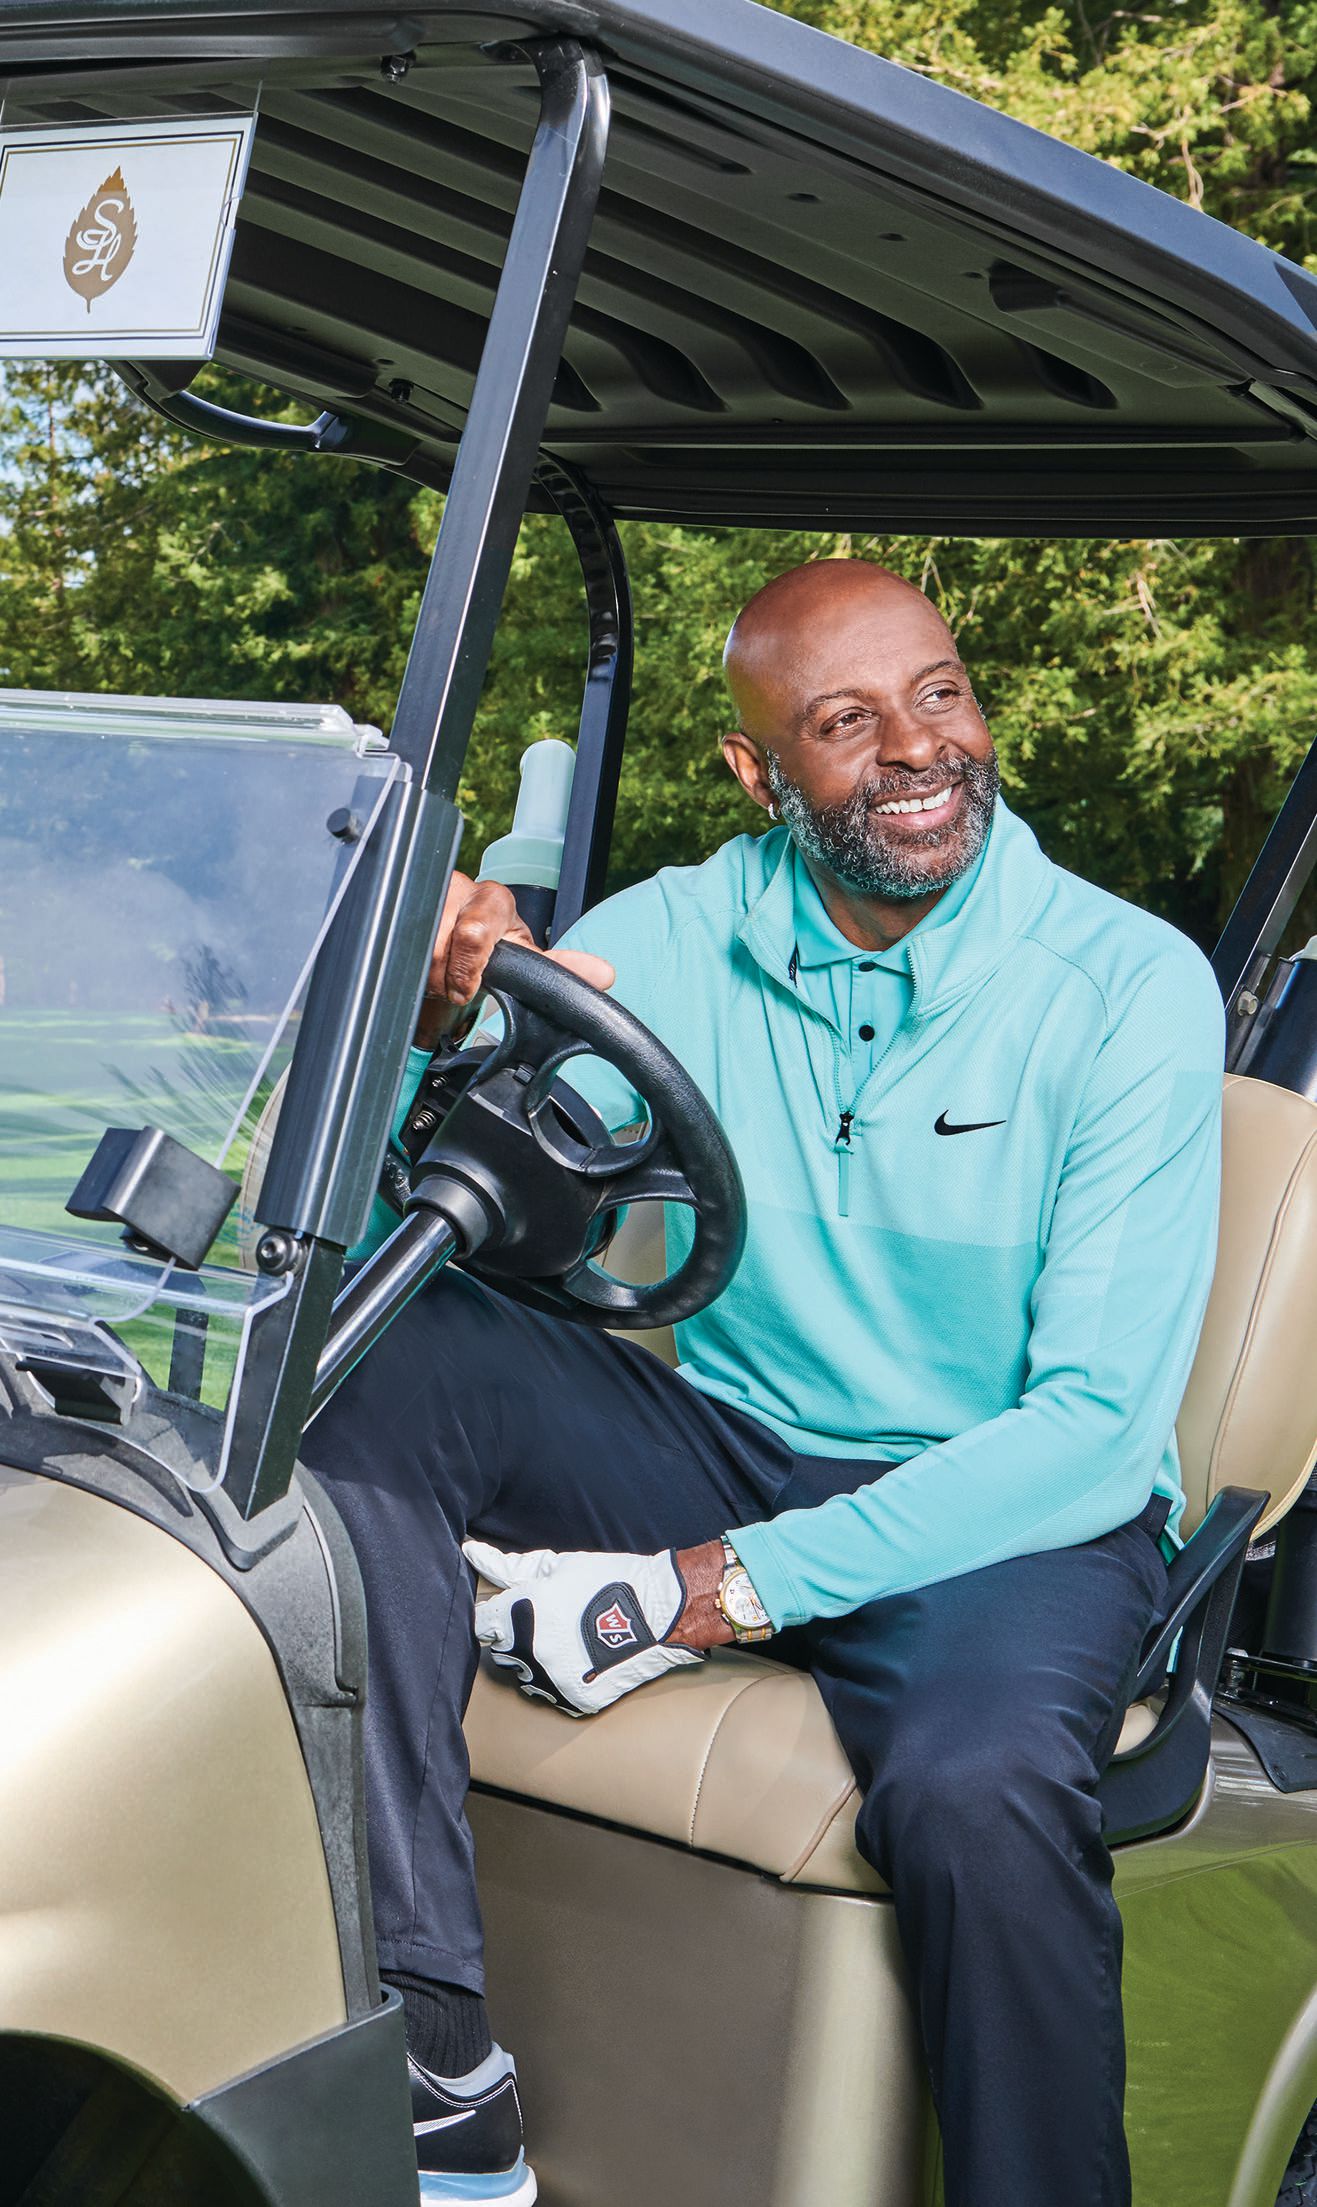 Jerry Rice plays regularly at Sharon Heights Country Club (sharonheightscc.com), where he’s a member. PHOTO BY BRENDAN MAININI